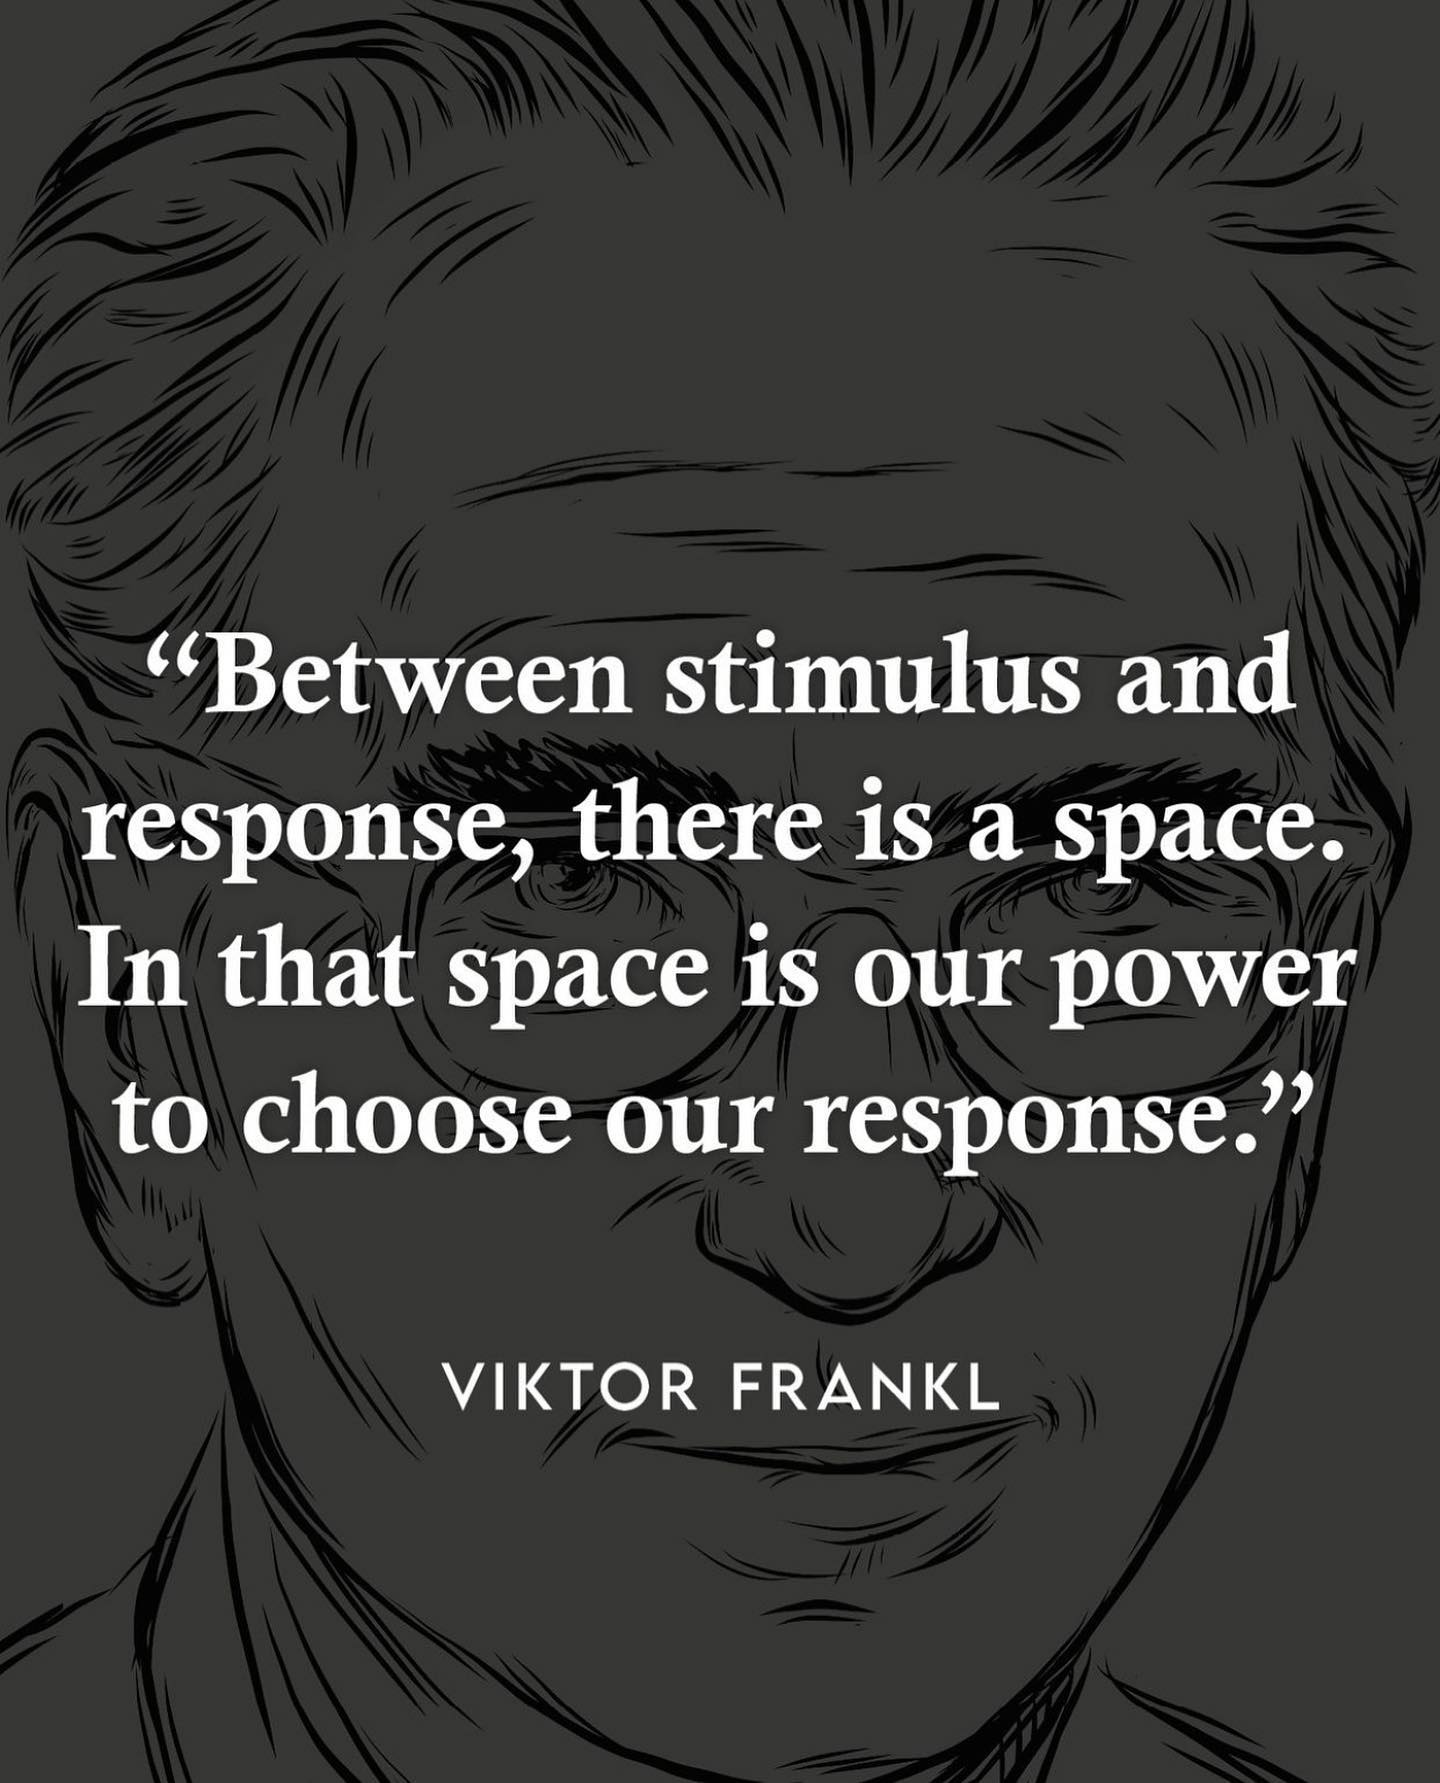 Between stimulus and response there is a space. In that space is our power to choose our response. In our response lies our growth and our freedom.